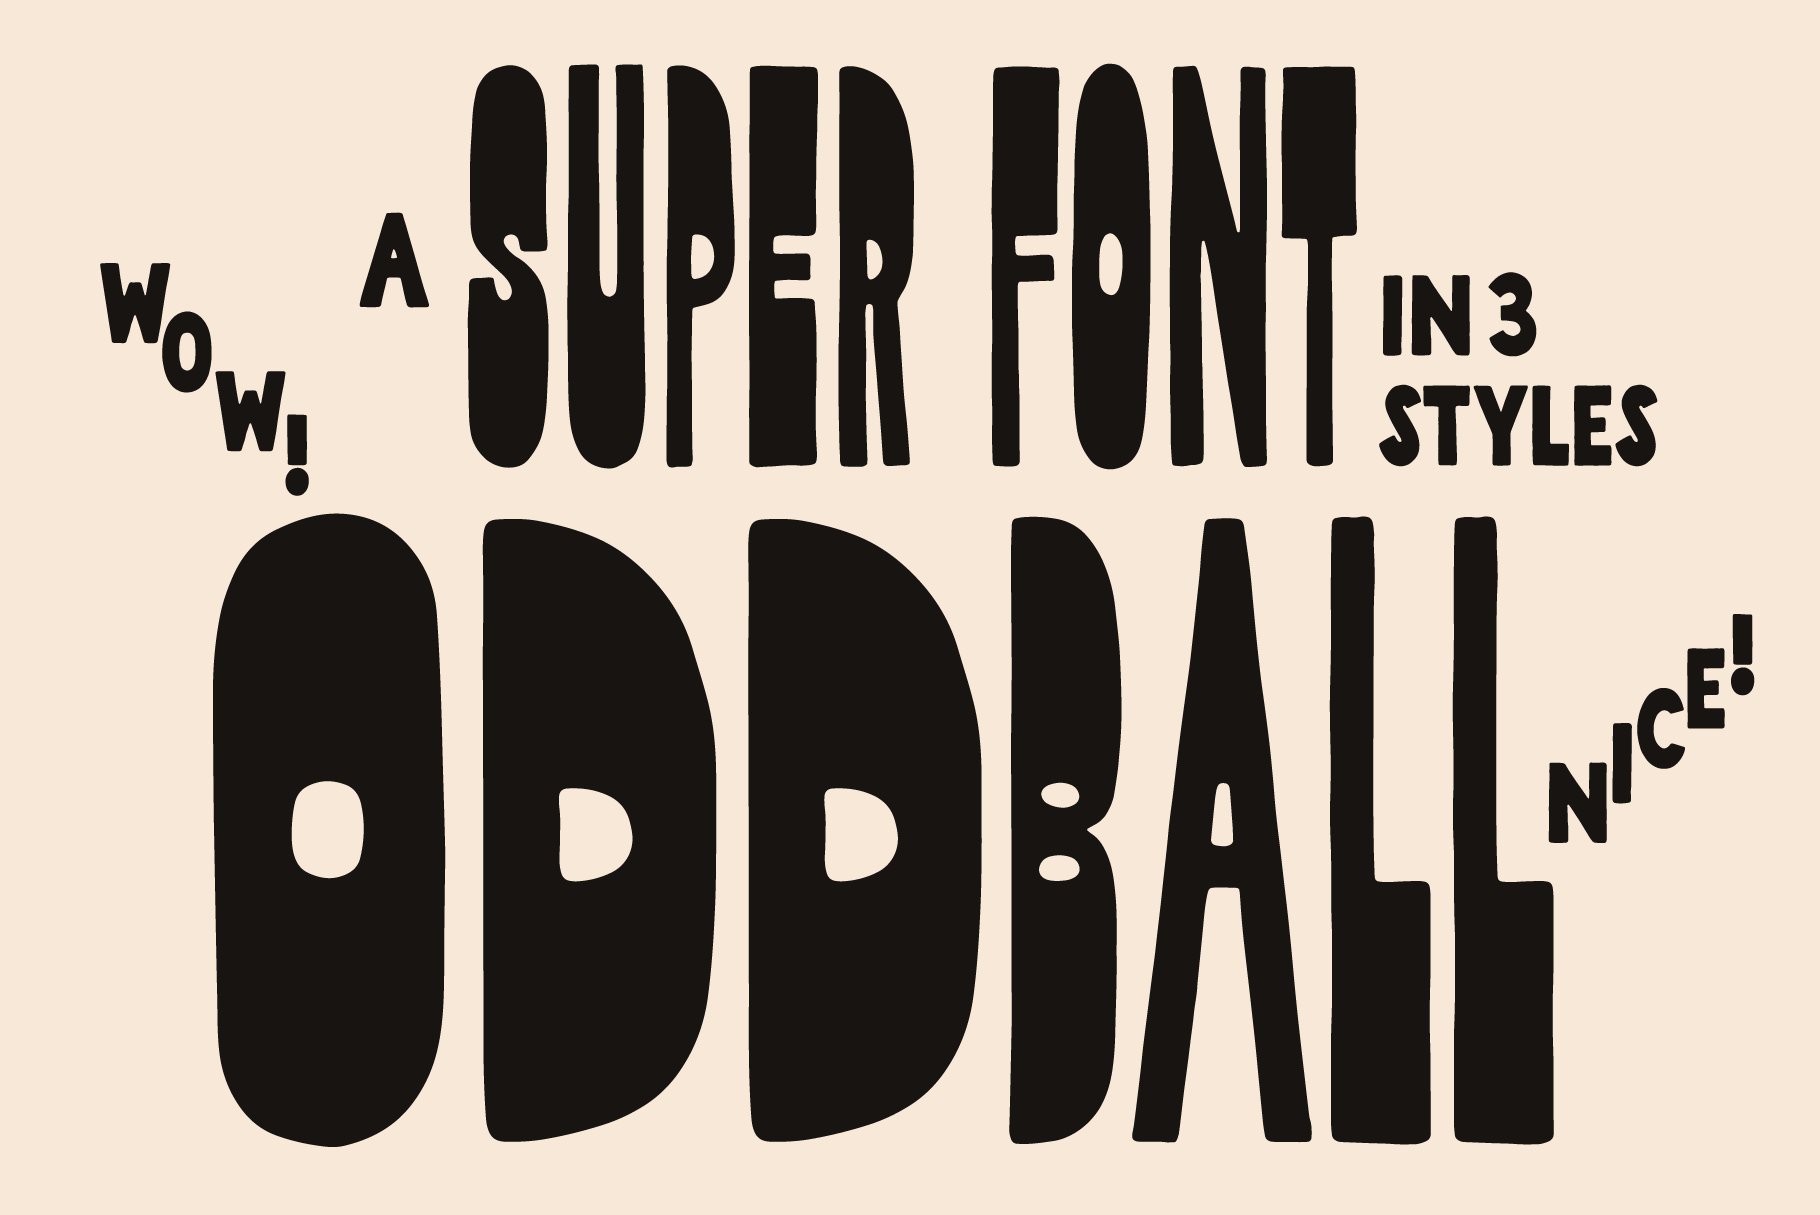 oddball hand lettered reverse contrast font cover 990